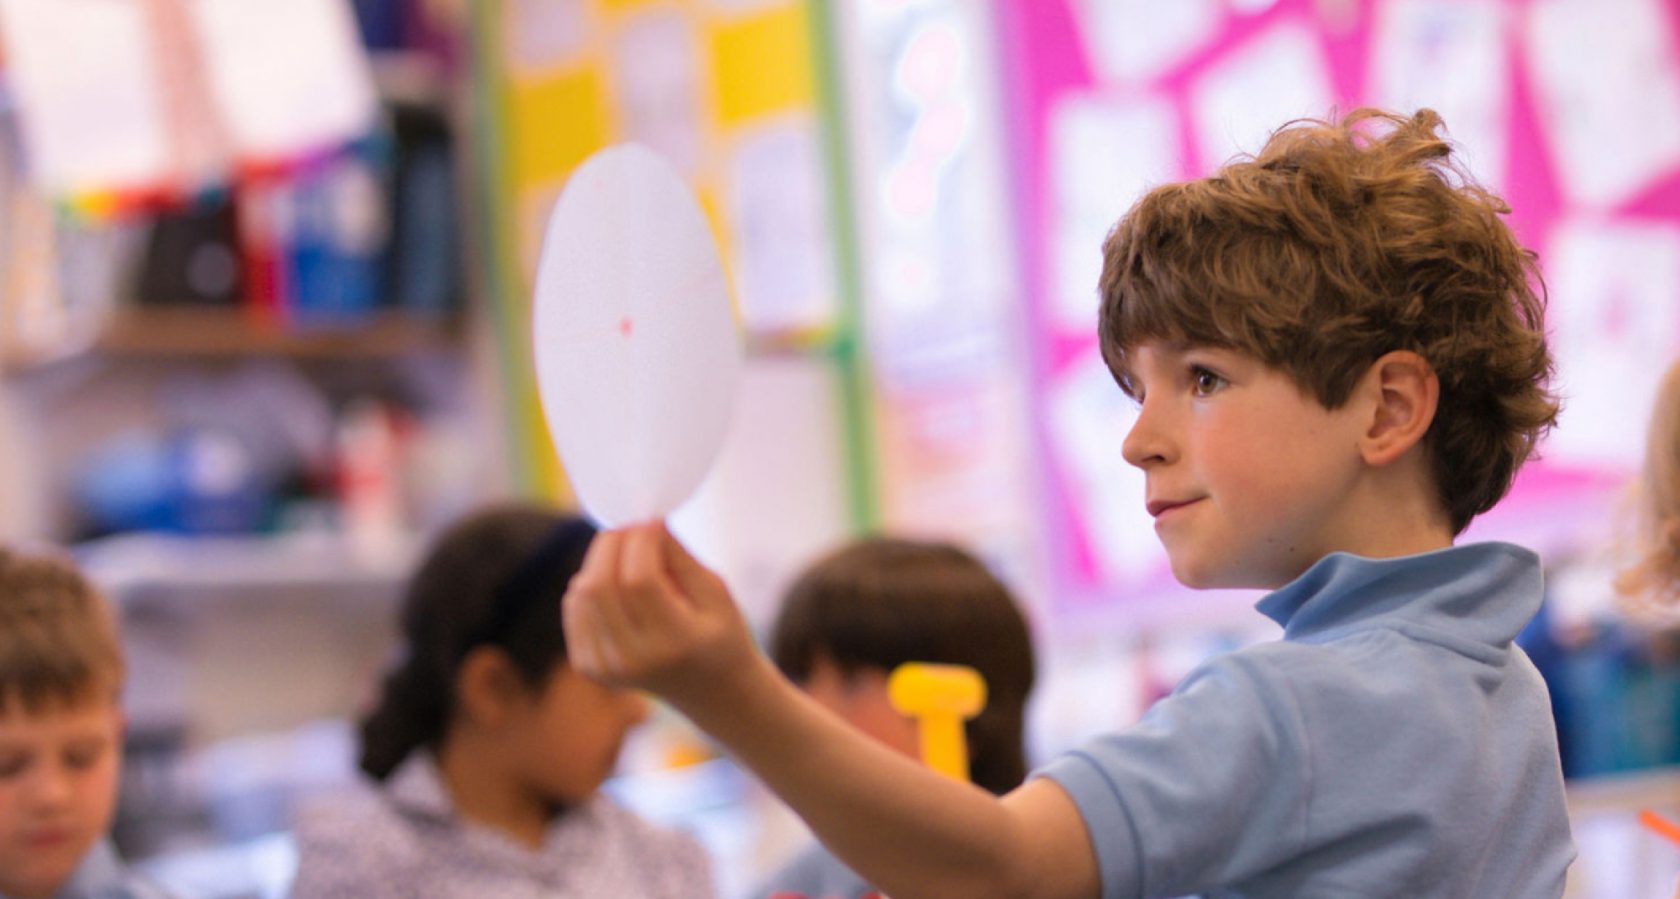 Image of a boy in class holding up a piece of paper